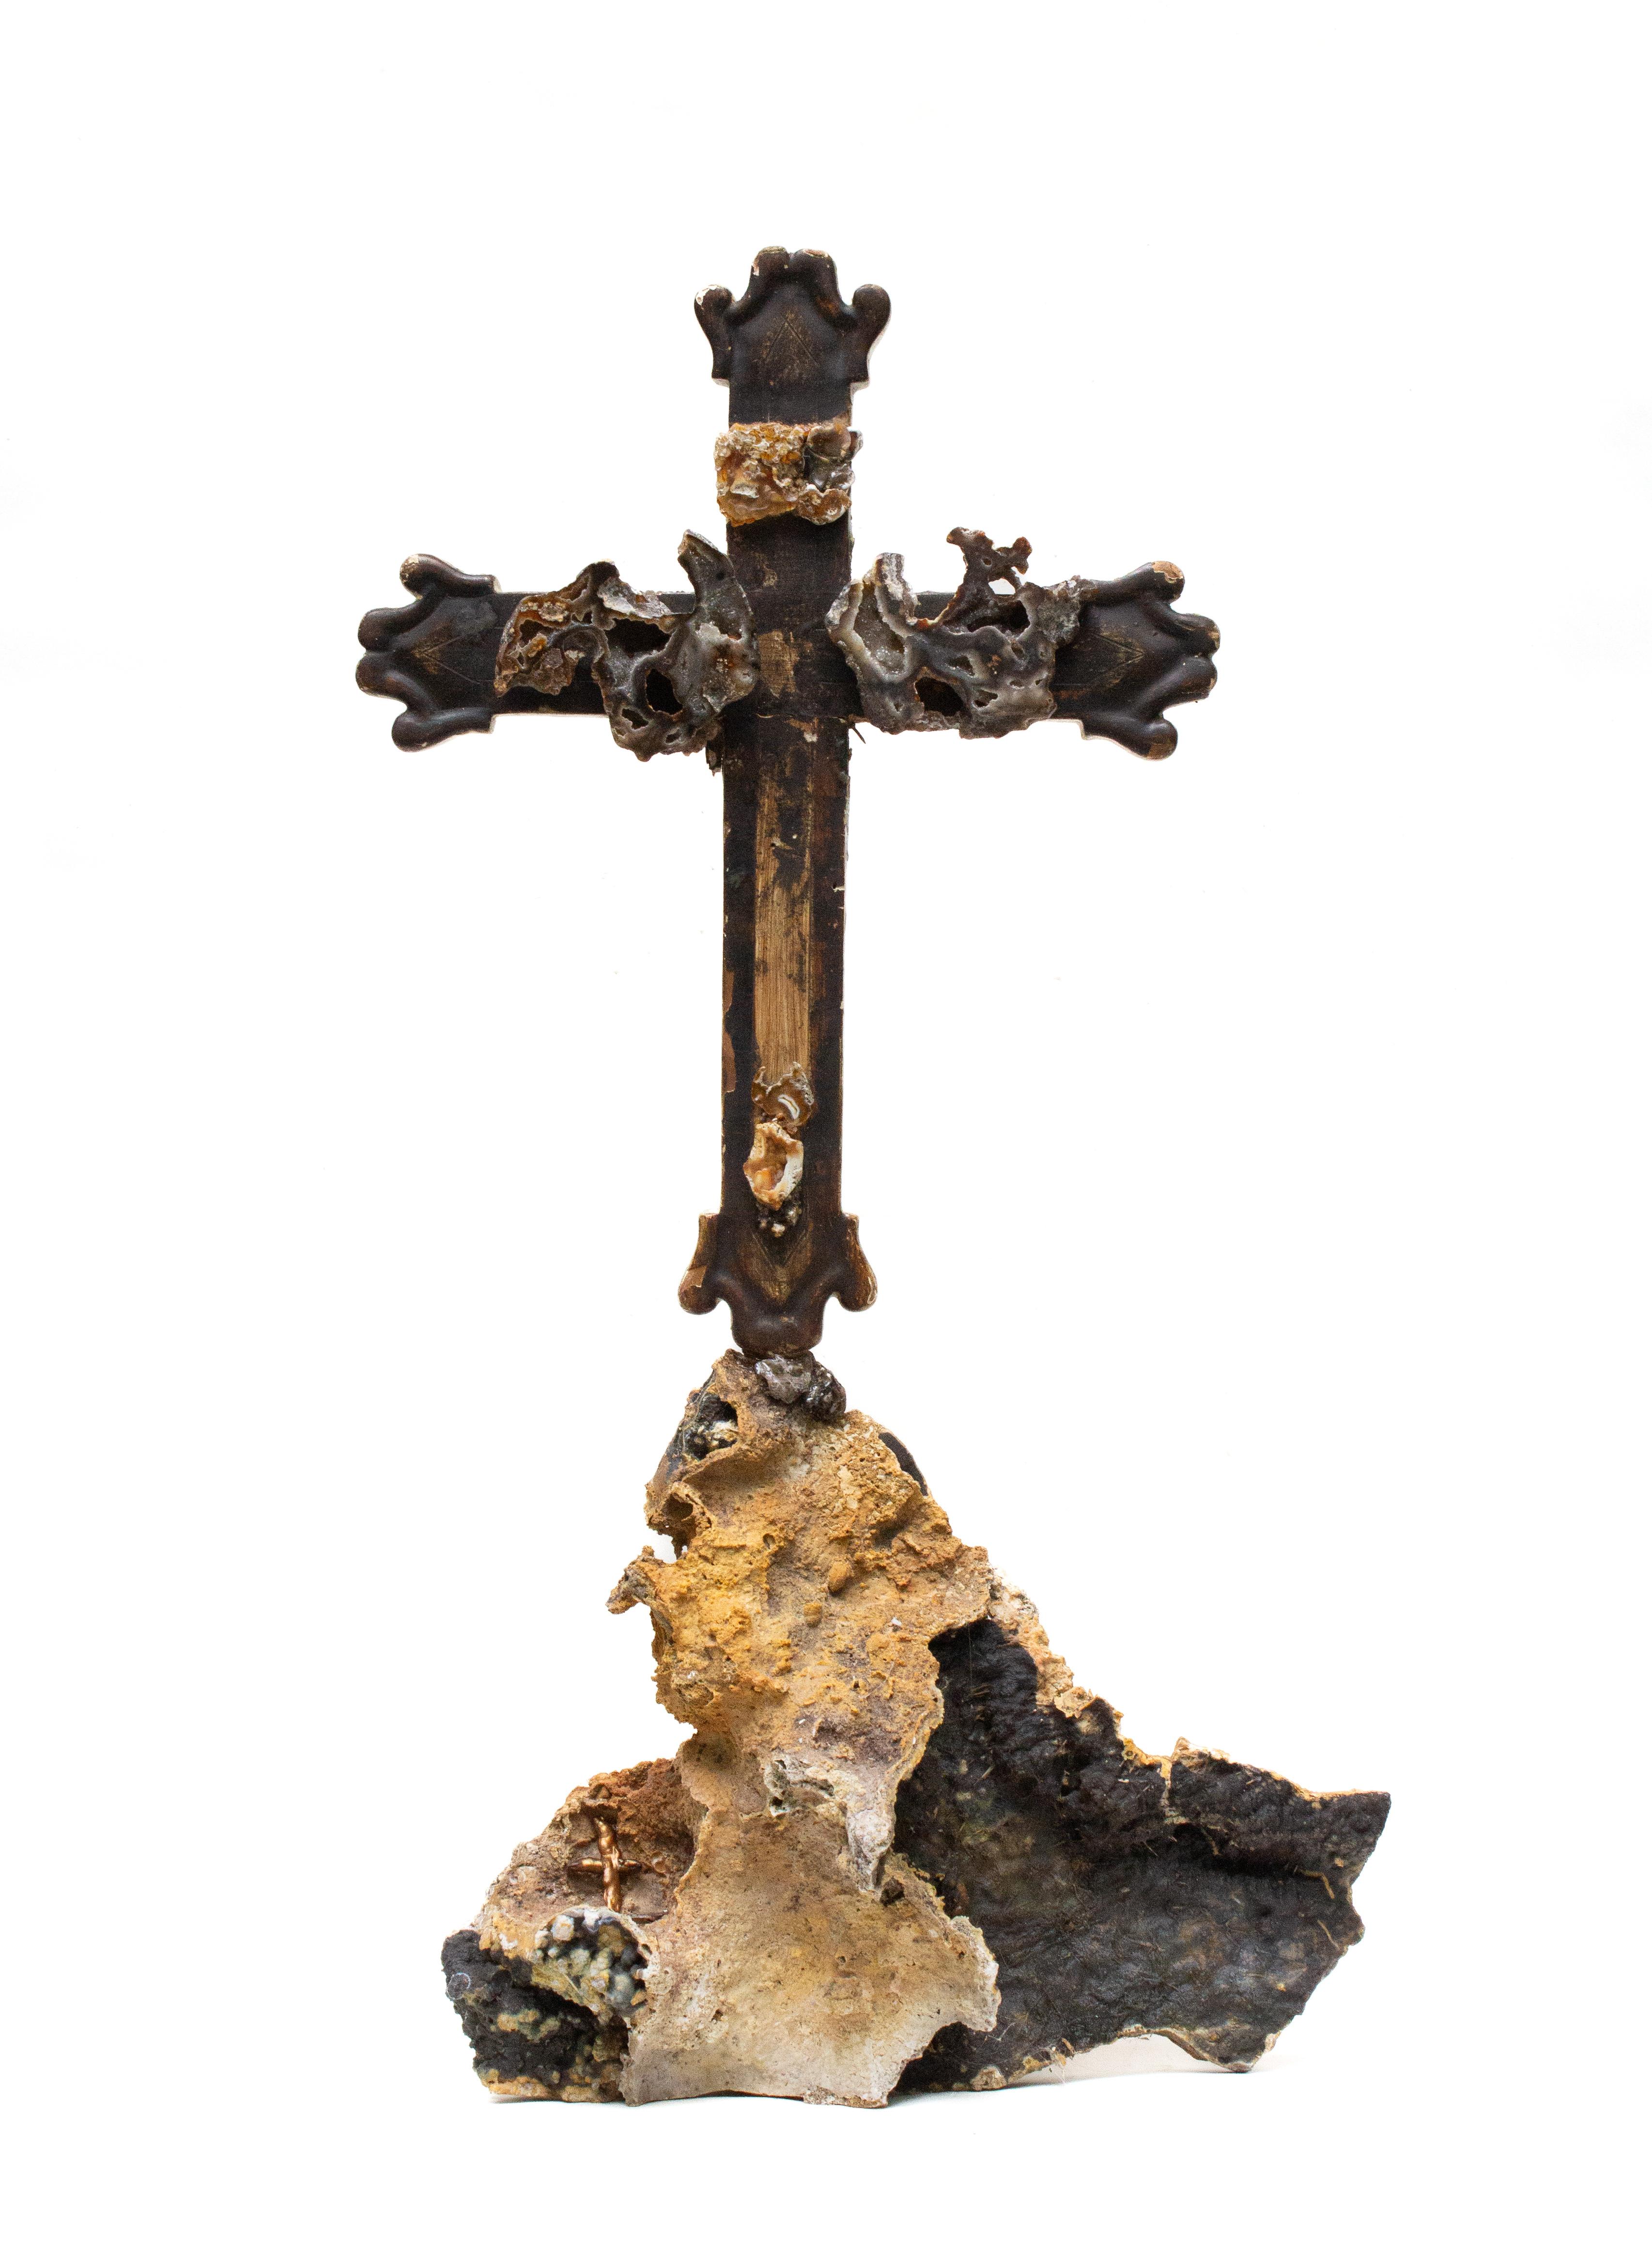 Sculptural 18th century Italian cross with fossil agate coral and mounted on fossil coral.

The fossil agate coral and fossil coral are put together with the 18th century cross to look as though the piece evolved together over time. A matching piece